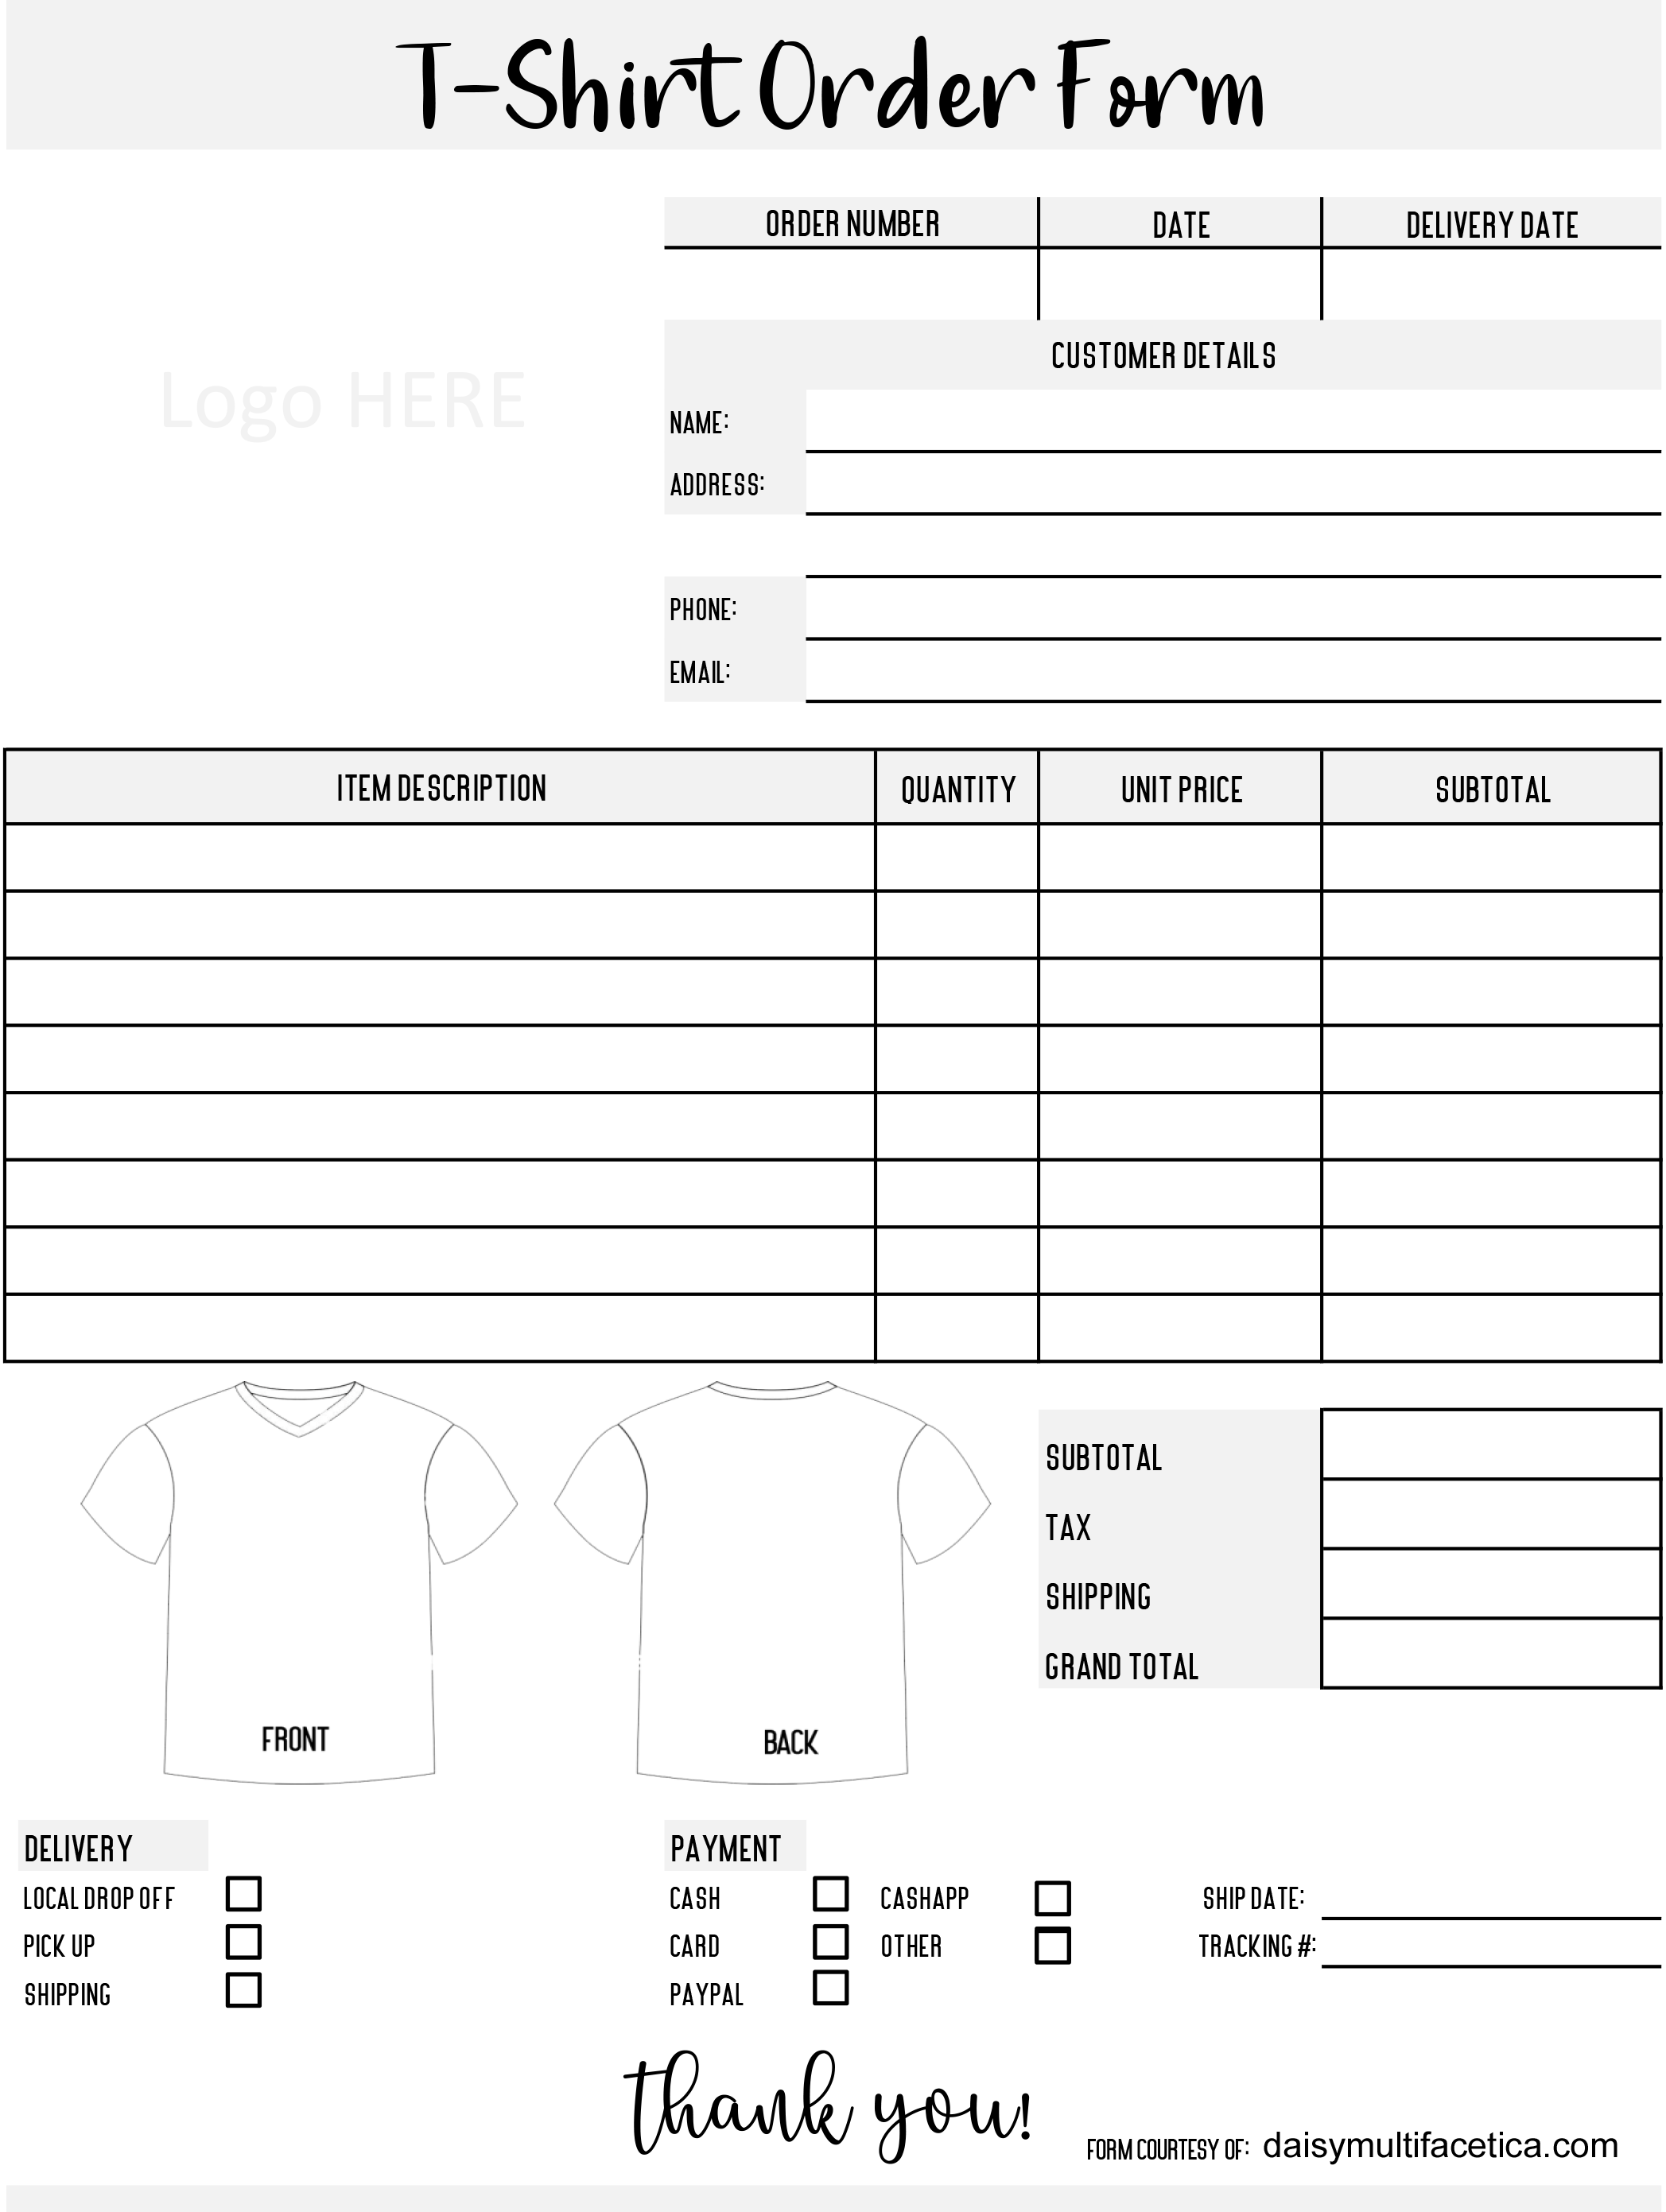 FREE TShirt Order Form TEMPLATES in PNG to Customize.